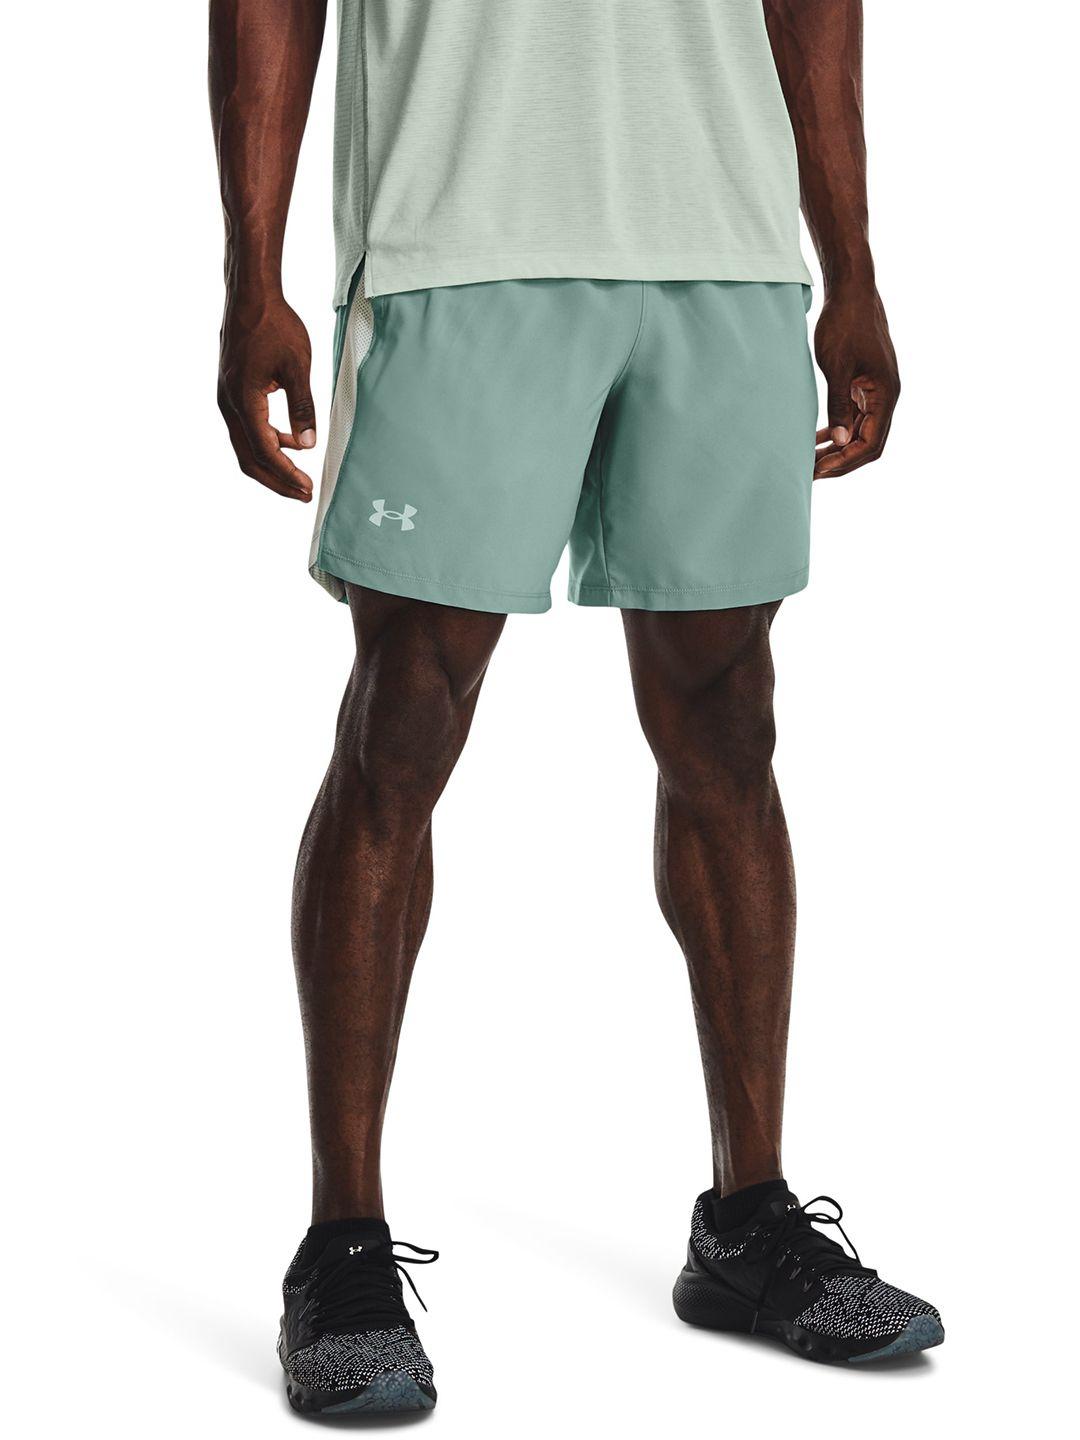 under-armour-men-low-rise-running-sports-shorts